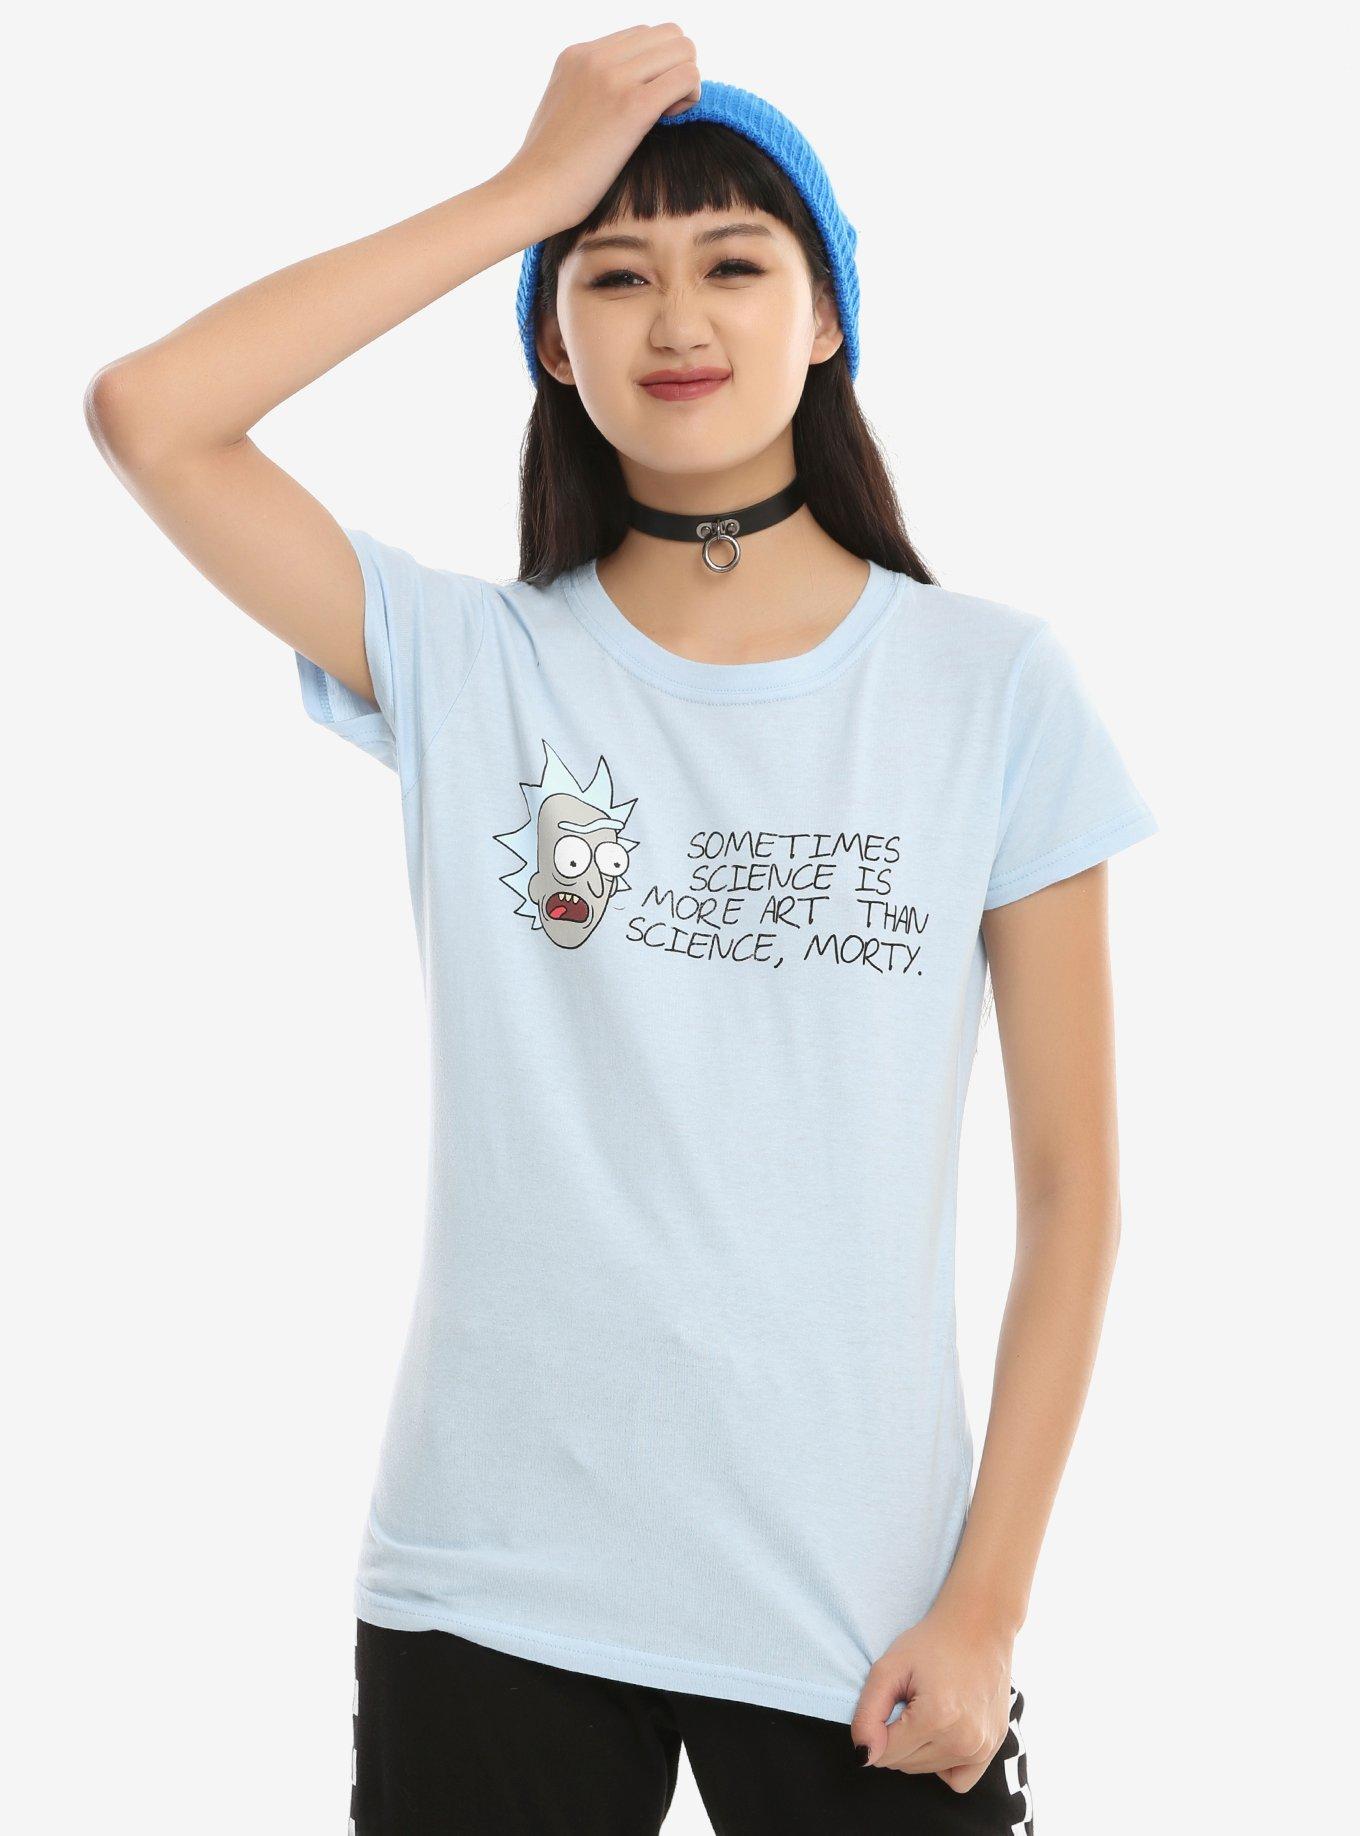 Rick And Morty Science More Art Than Science Girls T-Shirt, BLUE, hi-res